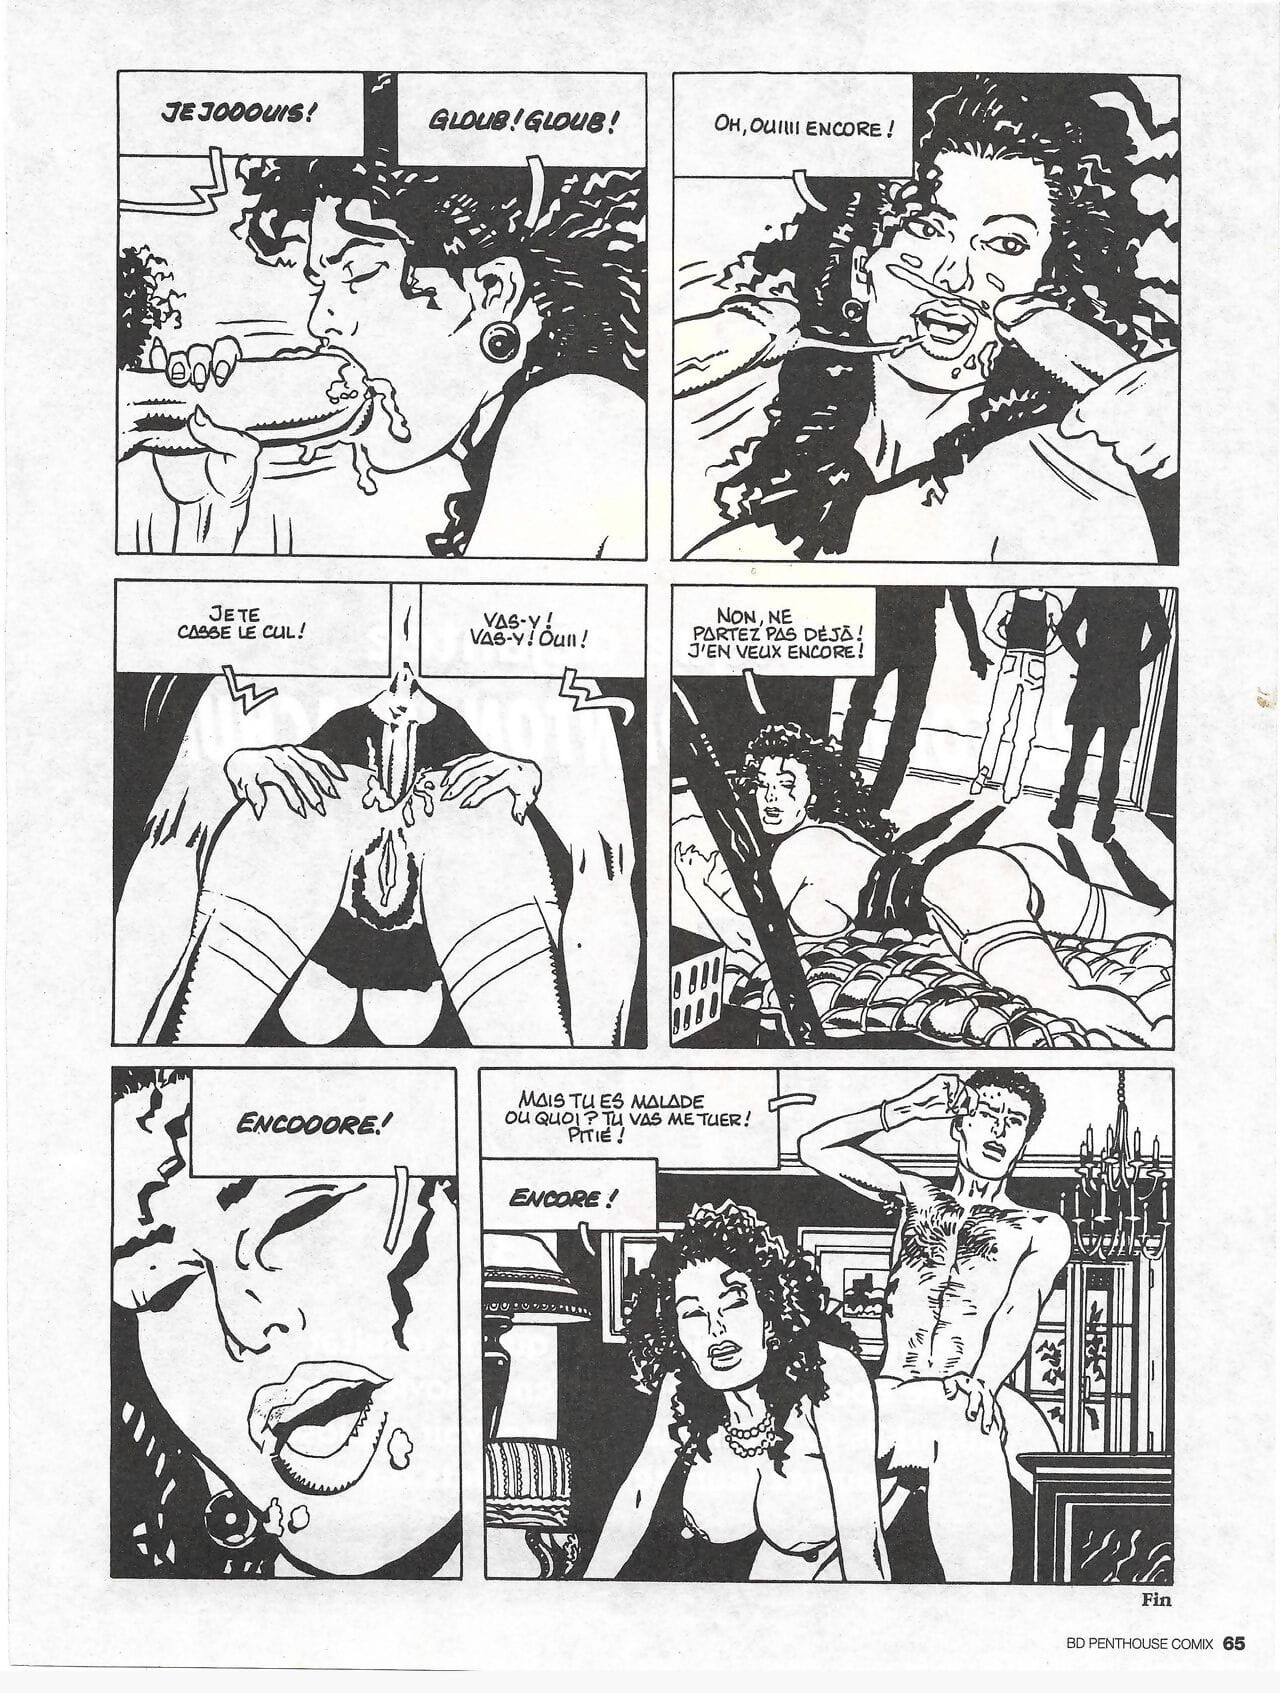 BD penthouse no. 03 Onderdeel 3 page 1